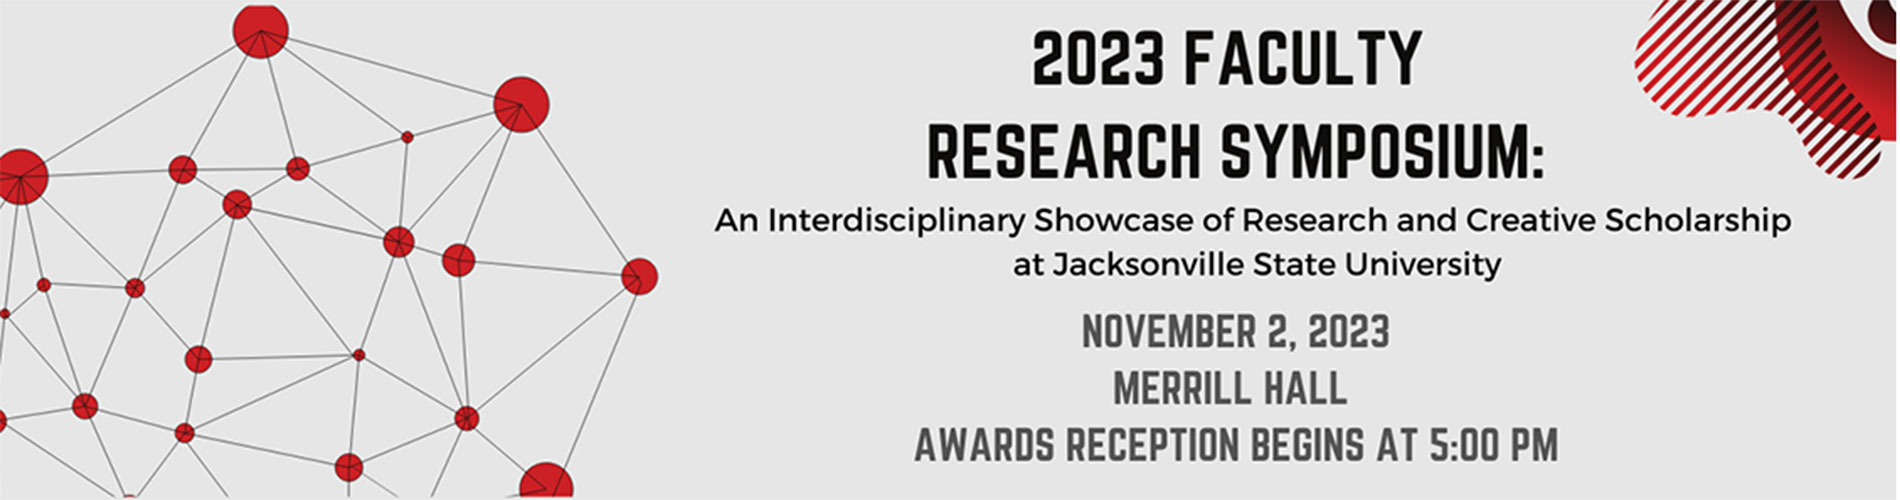 Faculty Research Symposium Banner Image